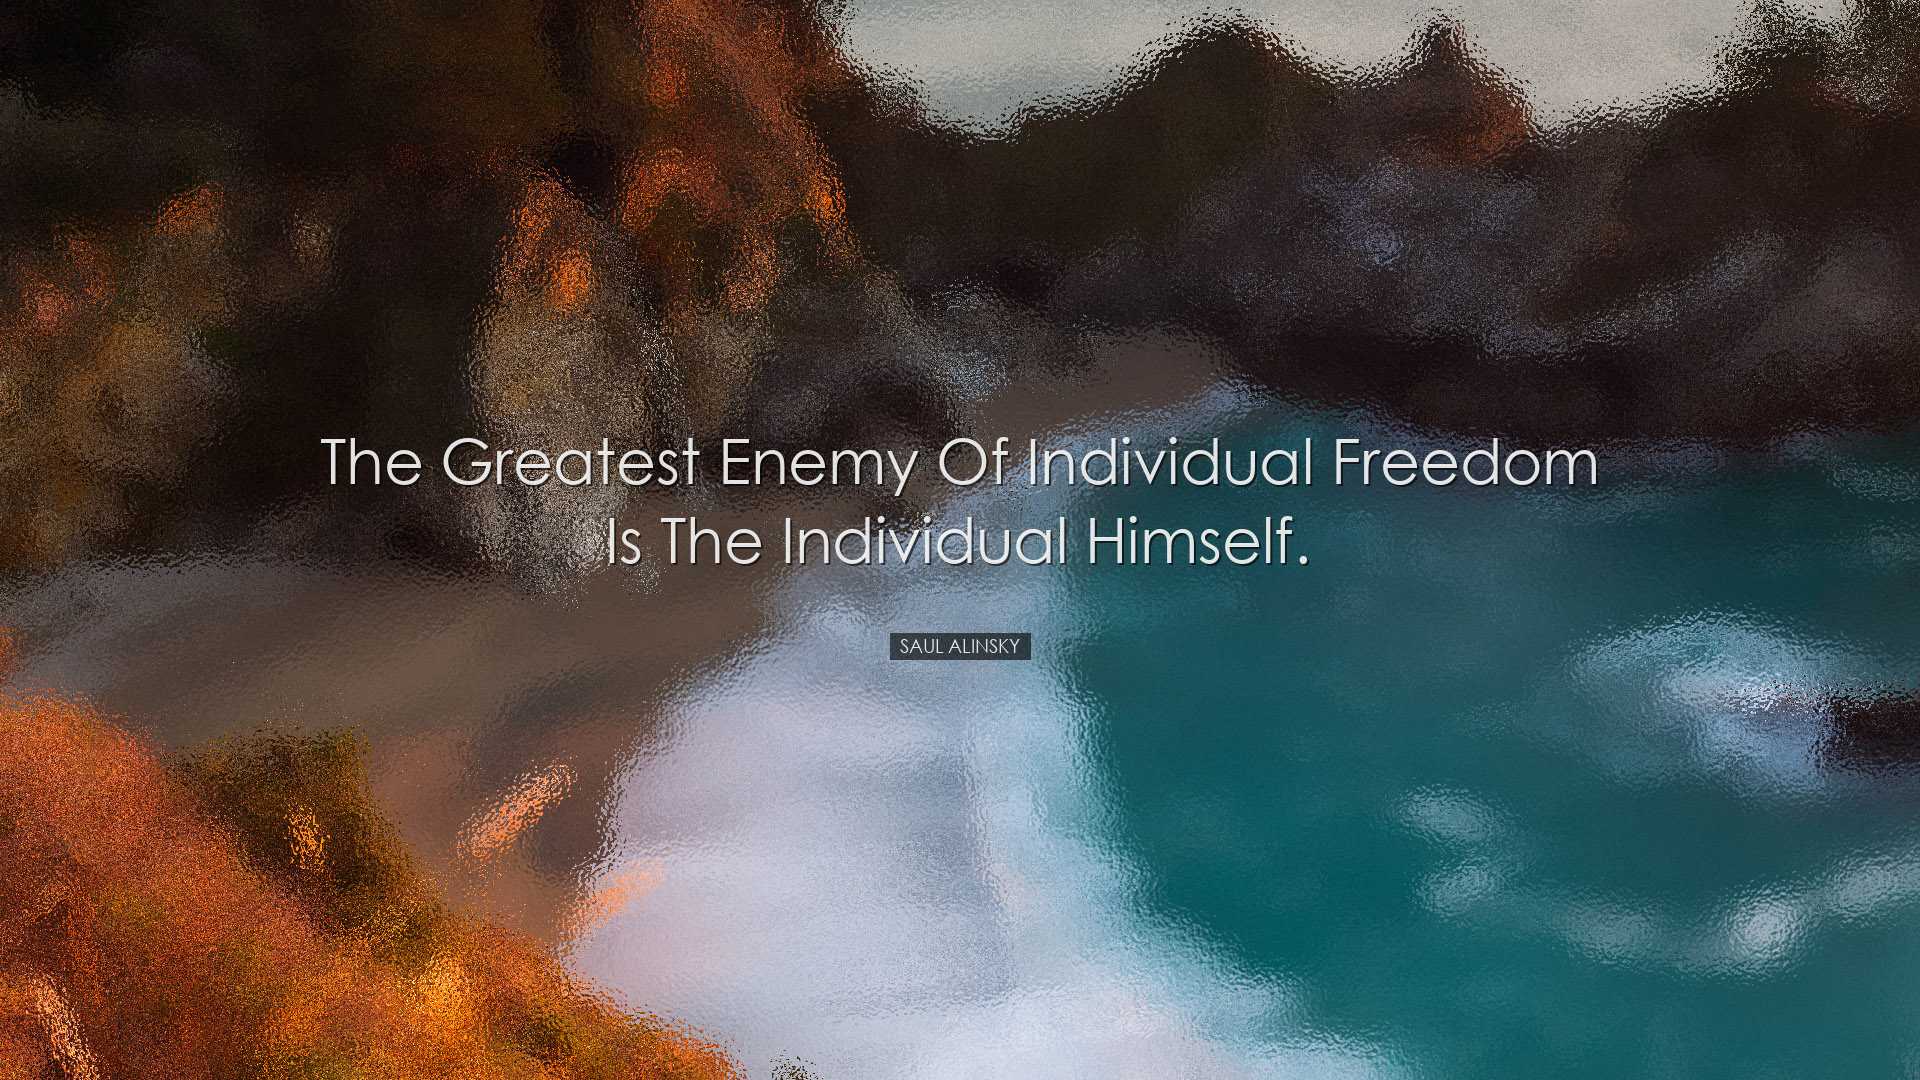 The greatest enemy of individual freedom is the individual himself